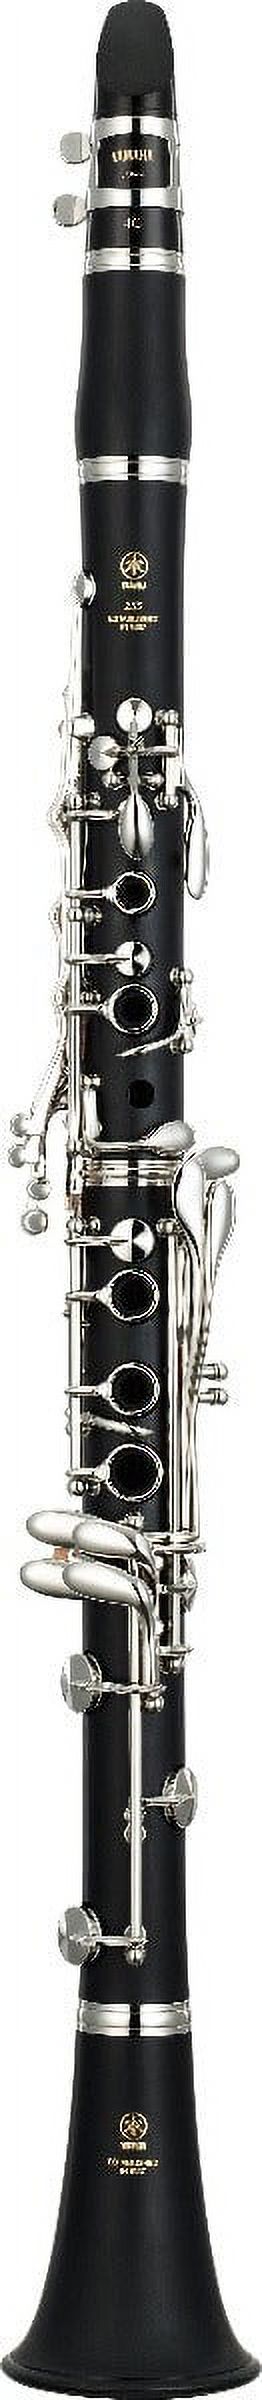 YCL-255 Student Clarinet - image 1 of 3